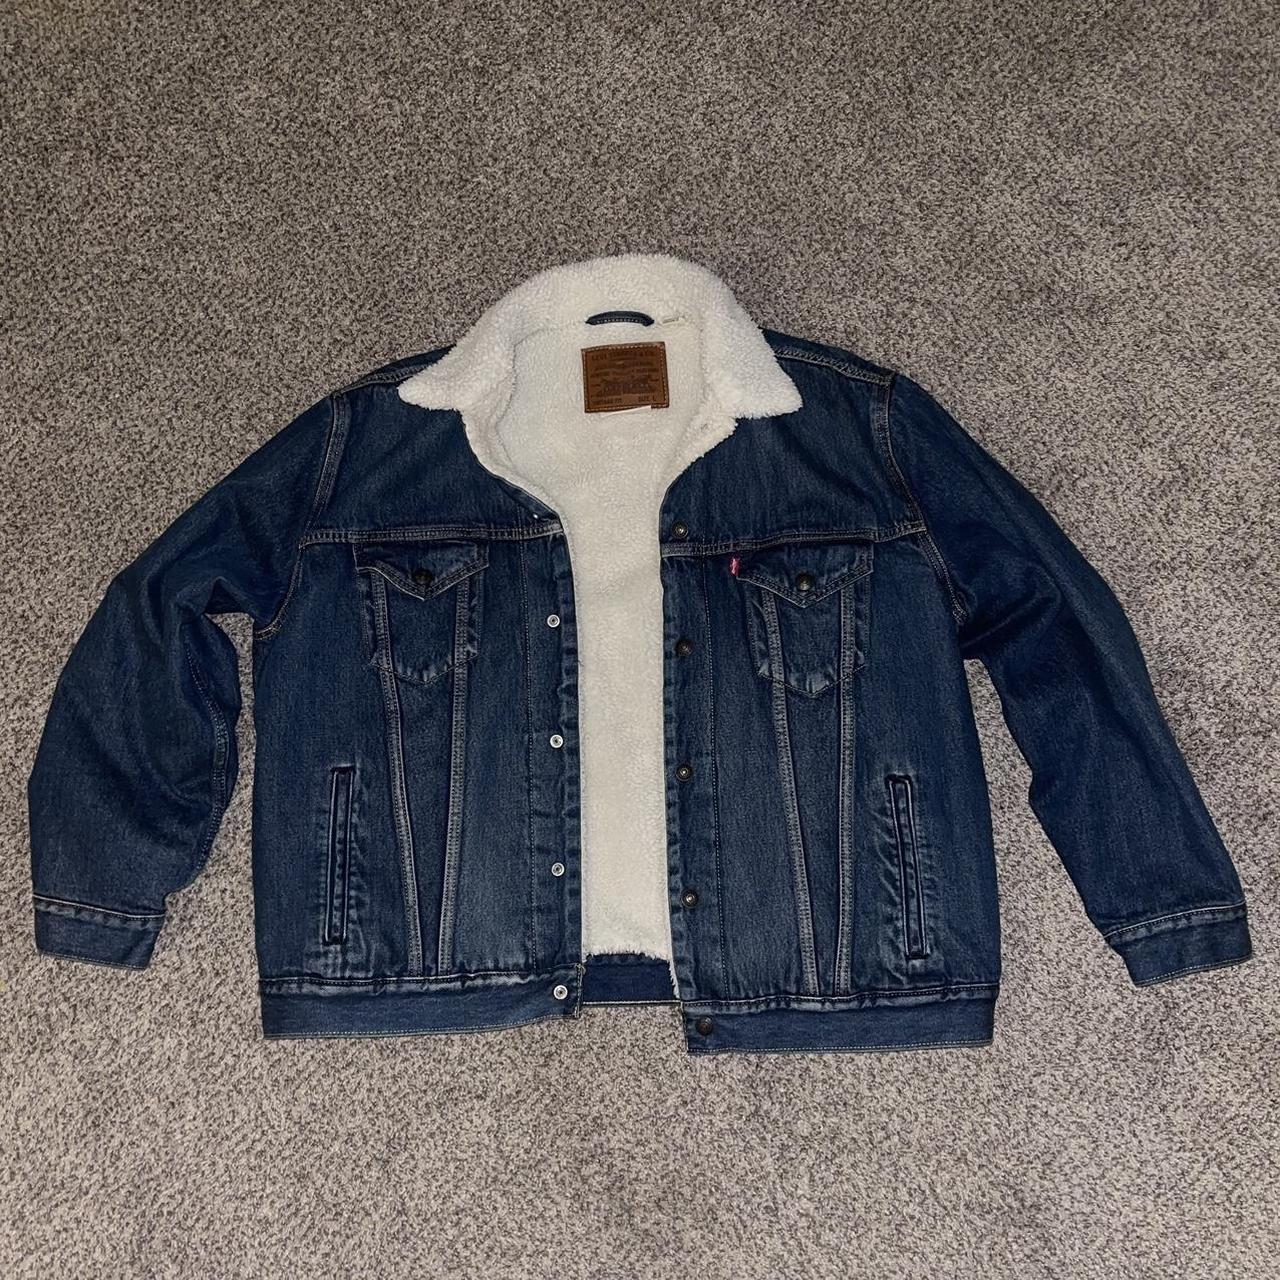 Levi's sherpa lined denim jacket with inner chest... - Depop